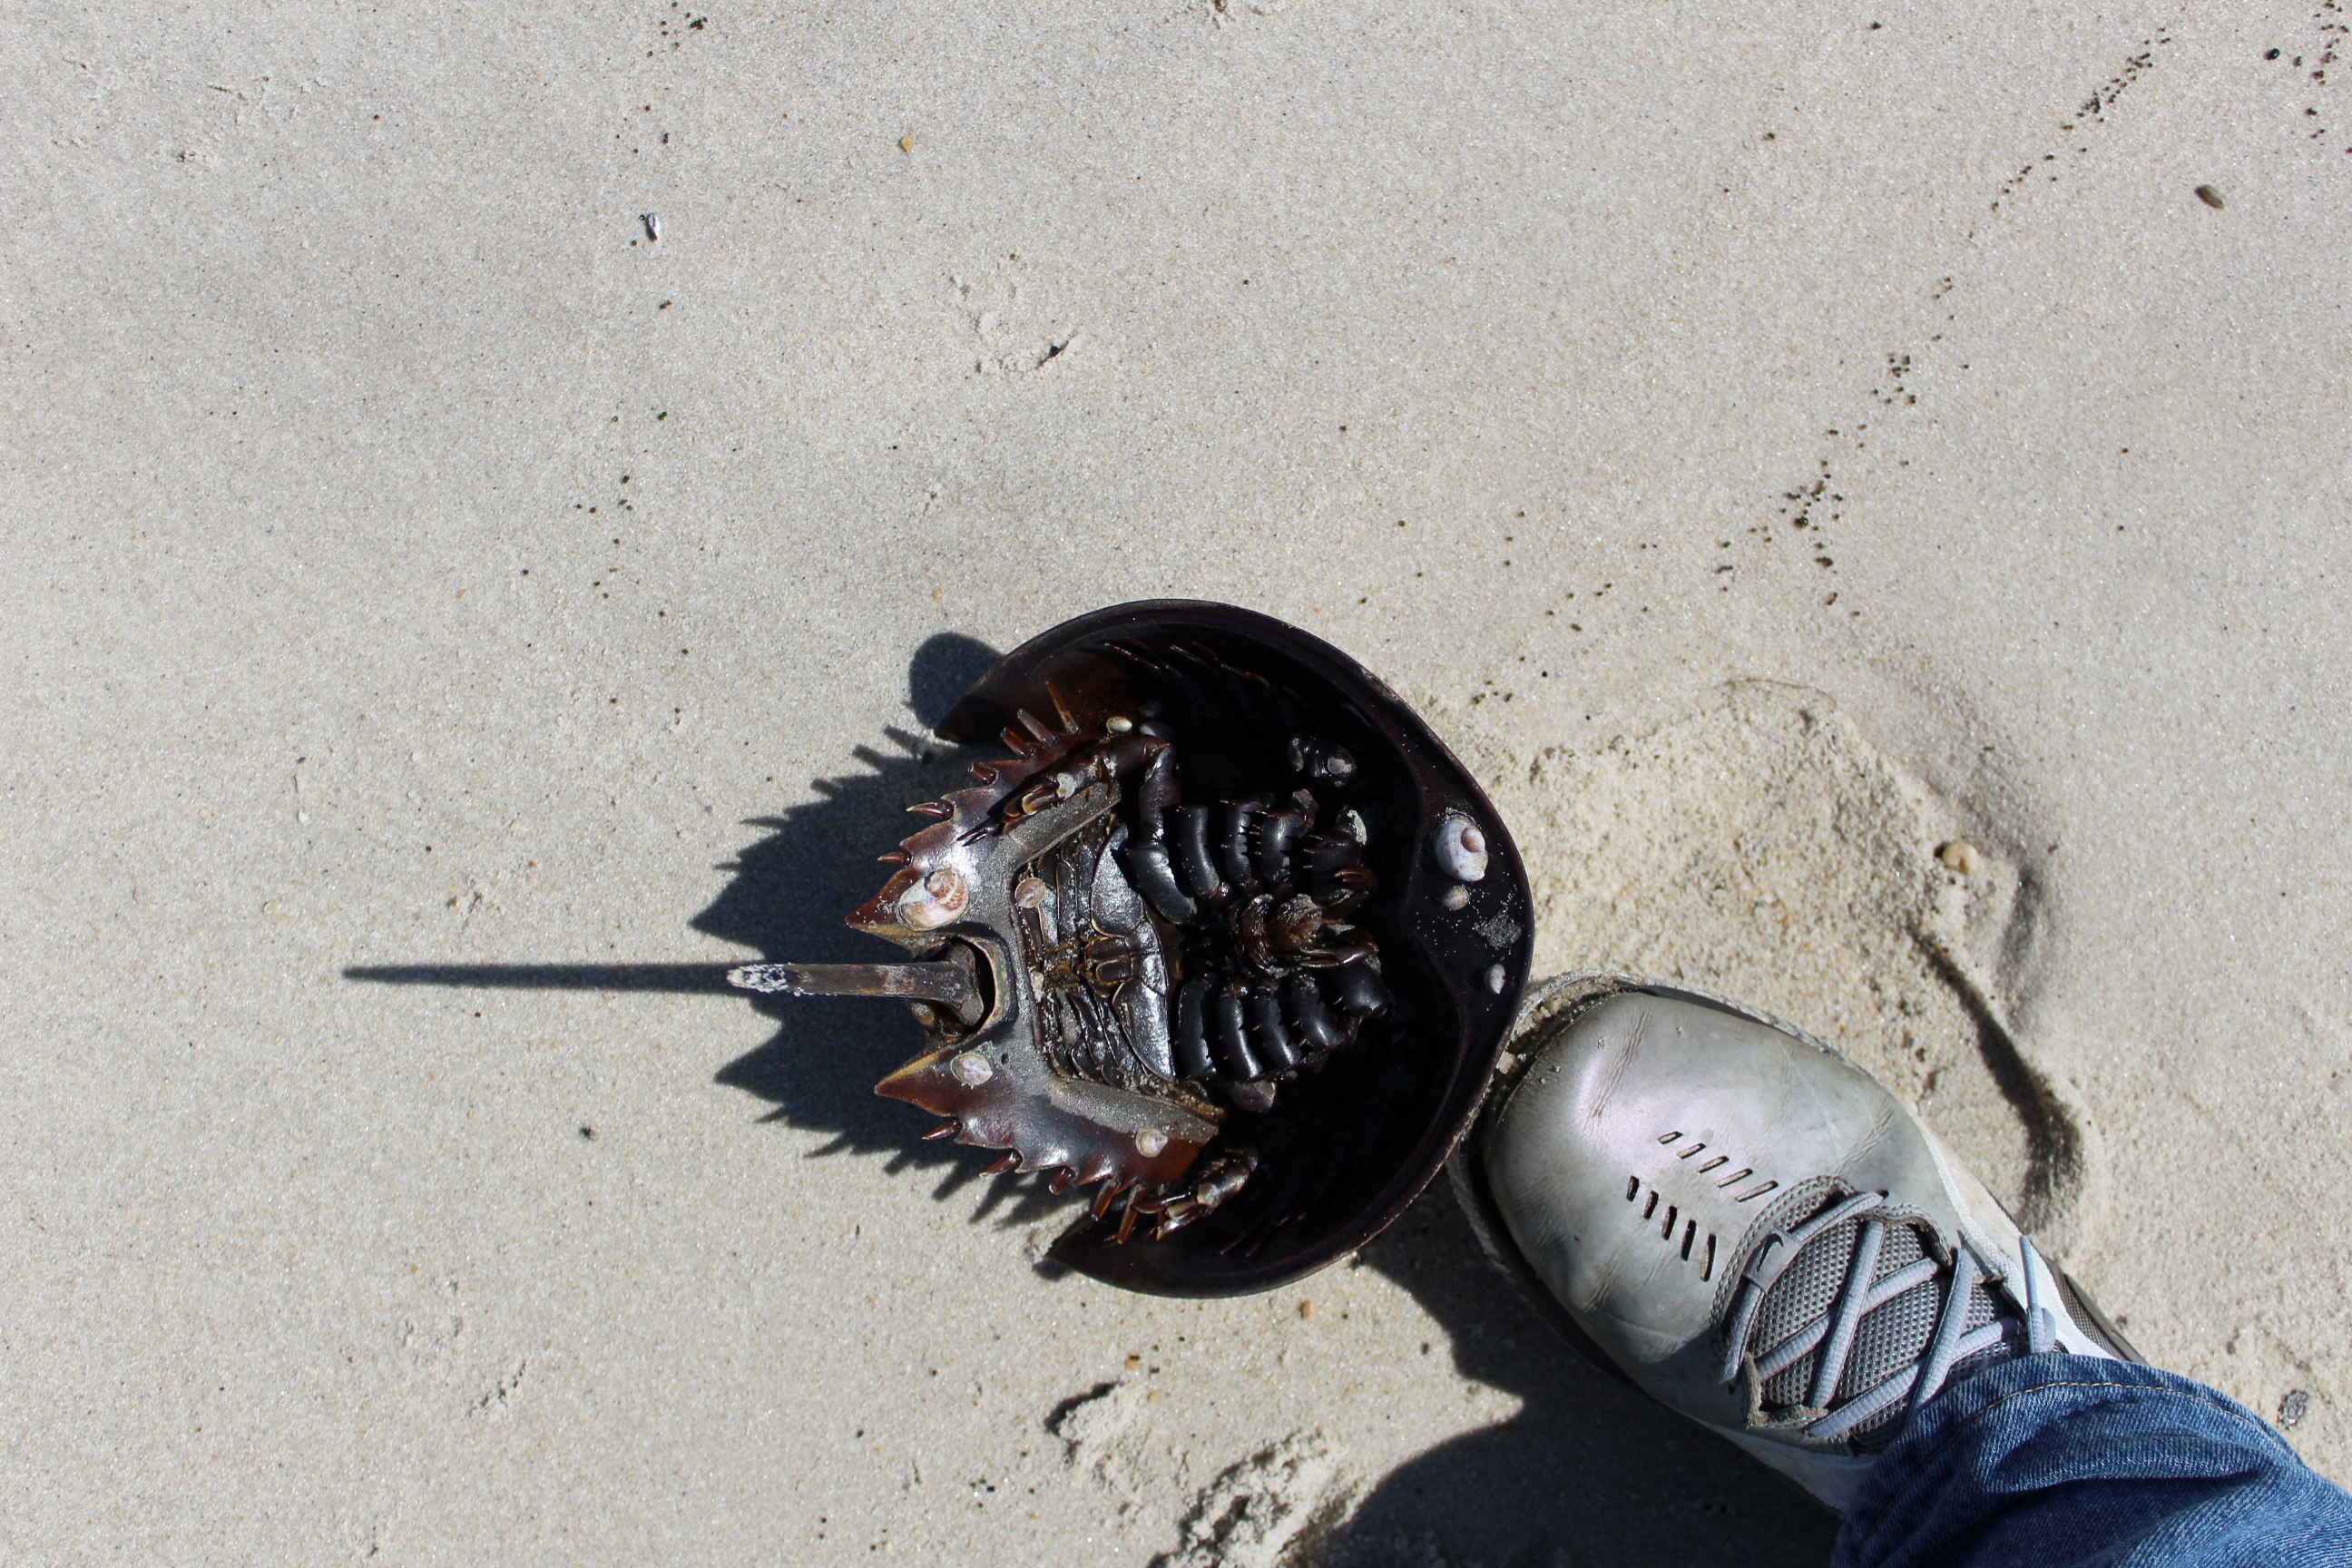 Ethical question of life and death: Should a horseshoe crab